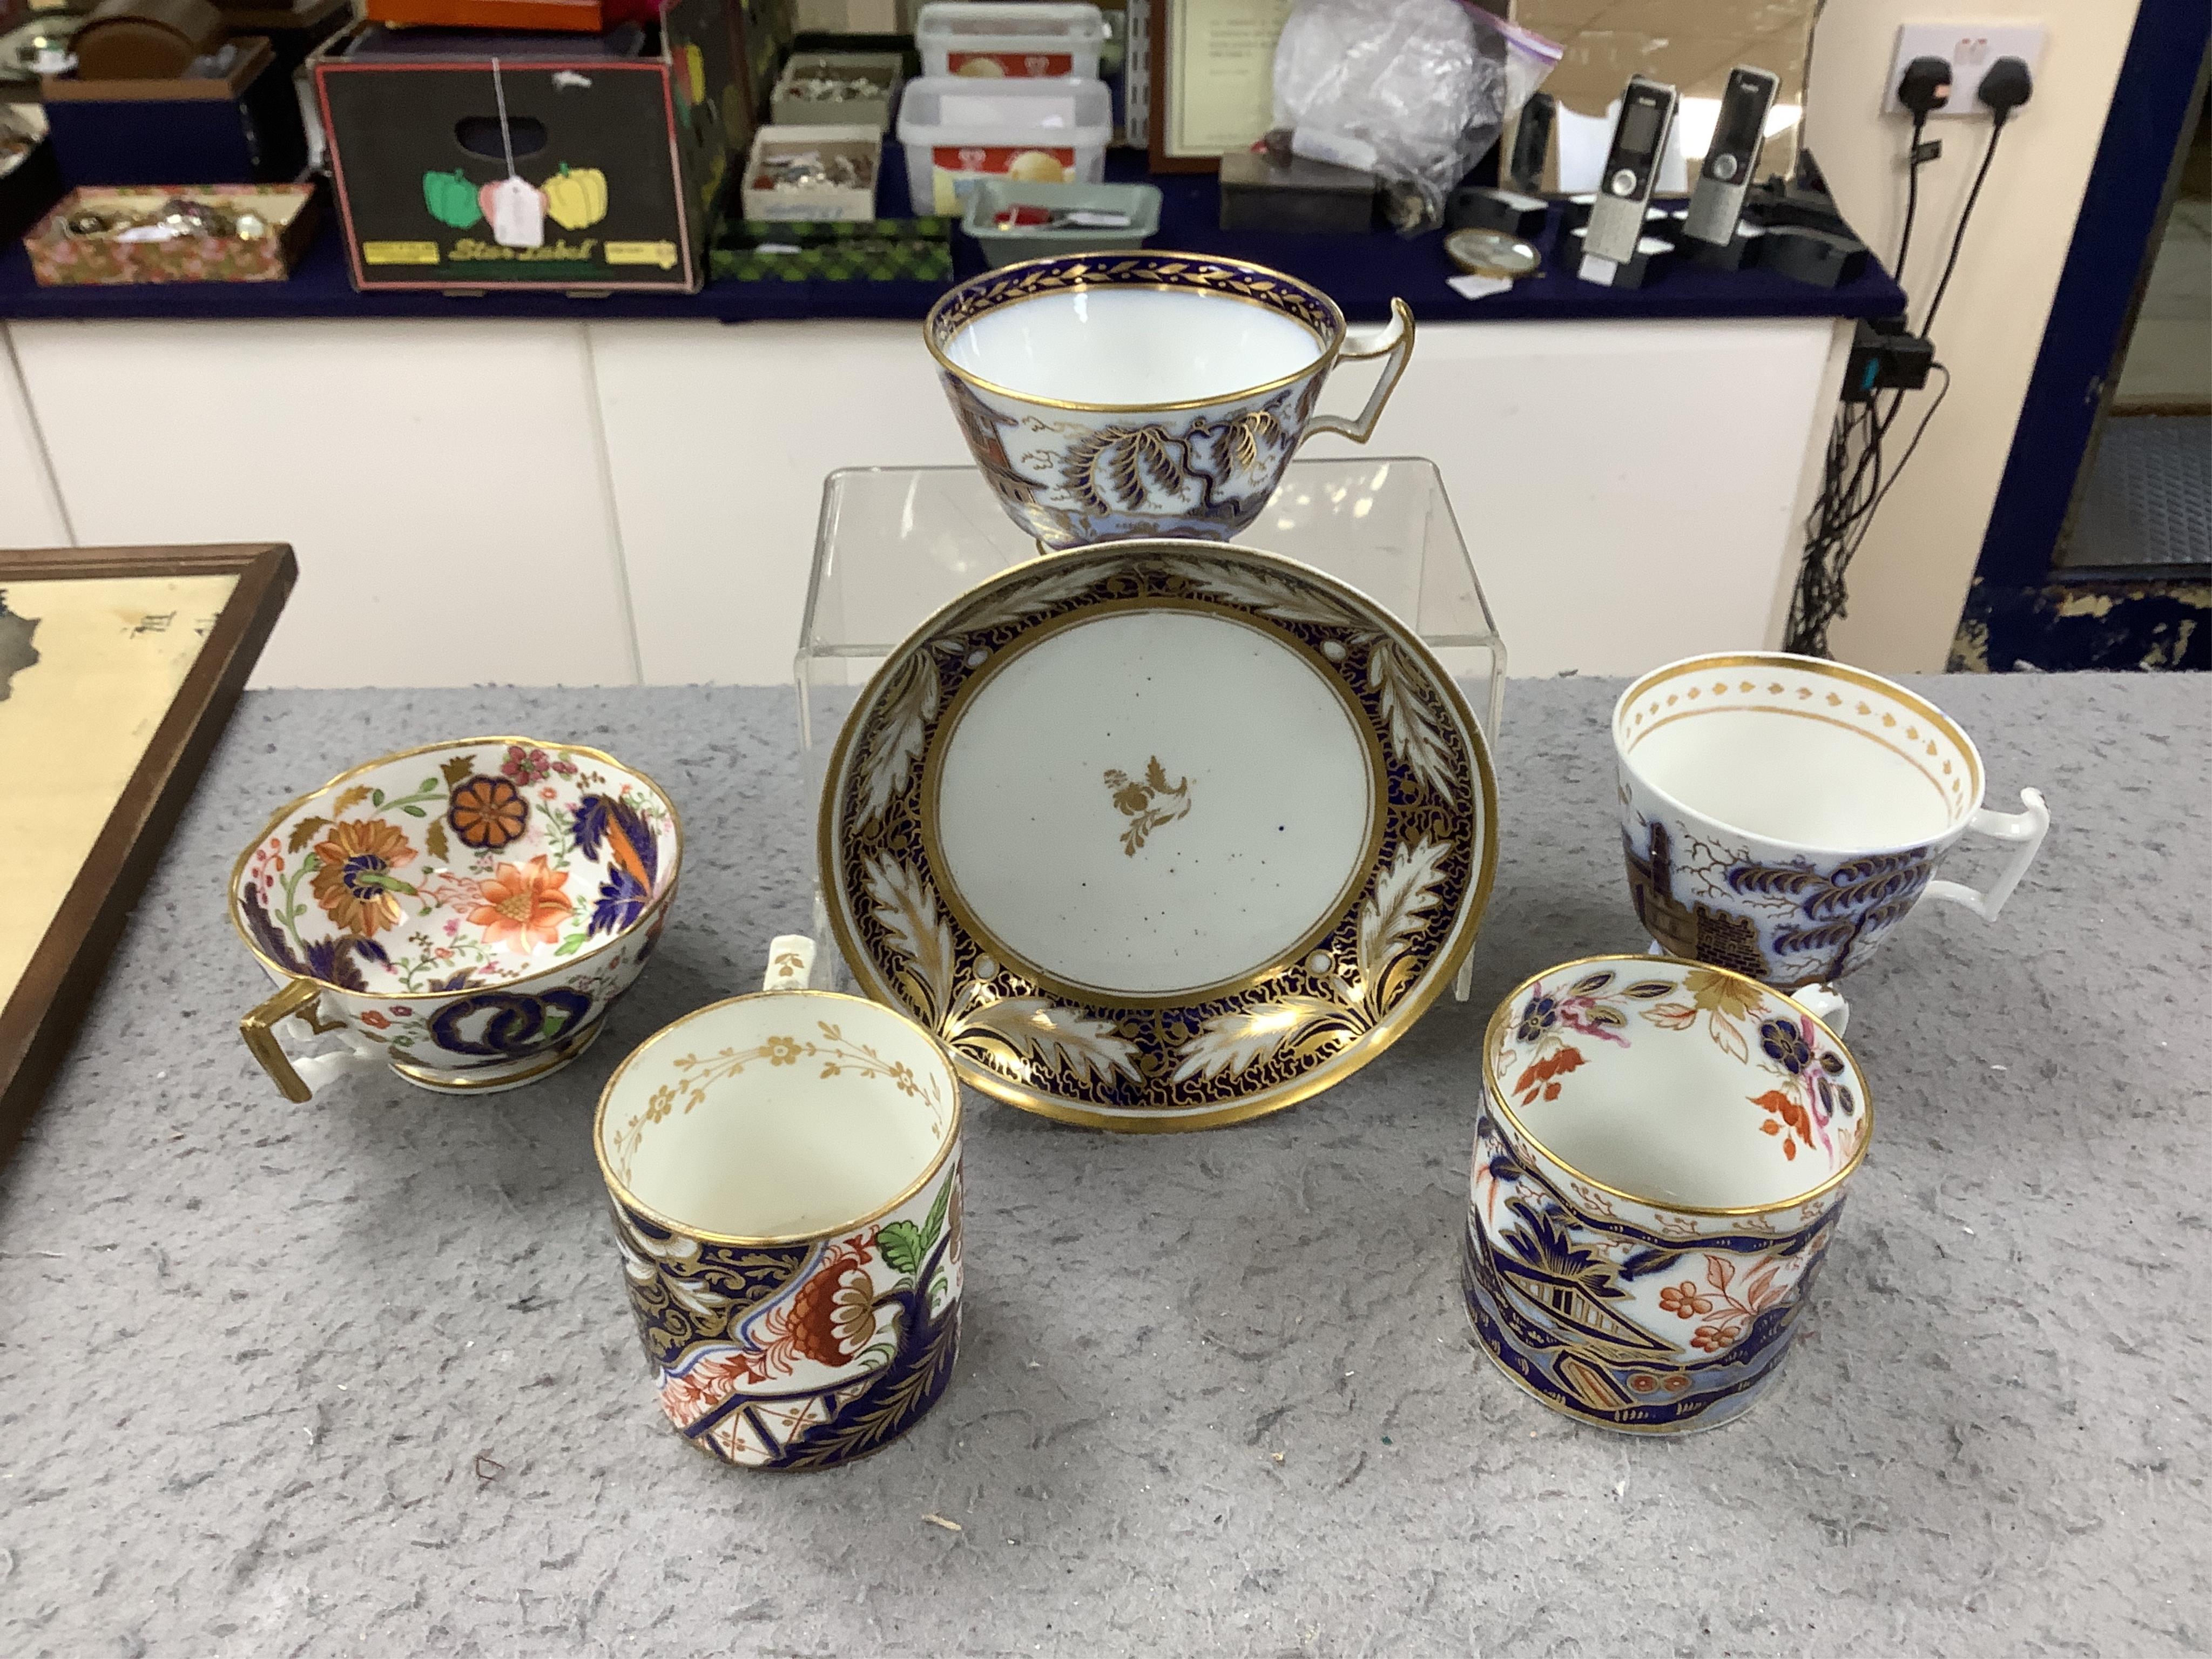 Eleven 1800-1820 English porcelain coffee cans and tea cups, including Imari pattern examples, one with matching saucer